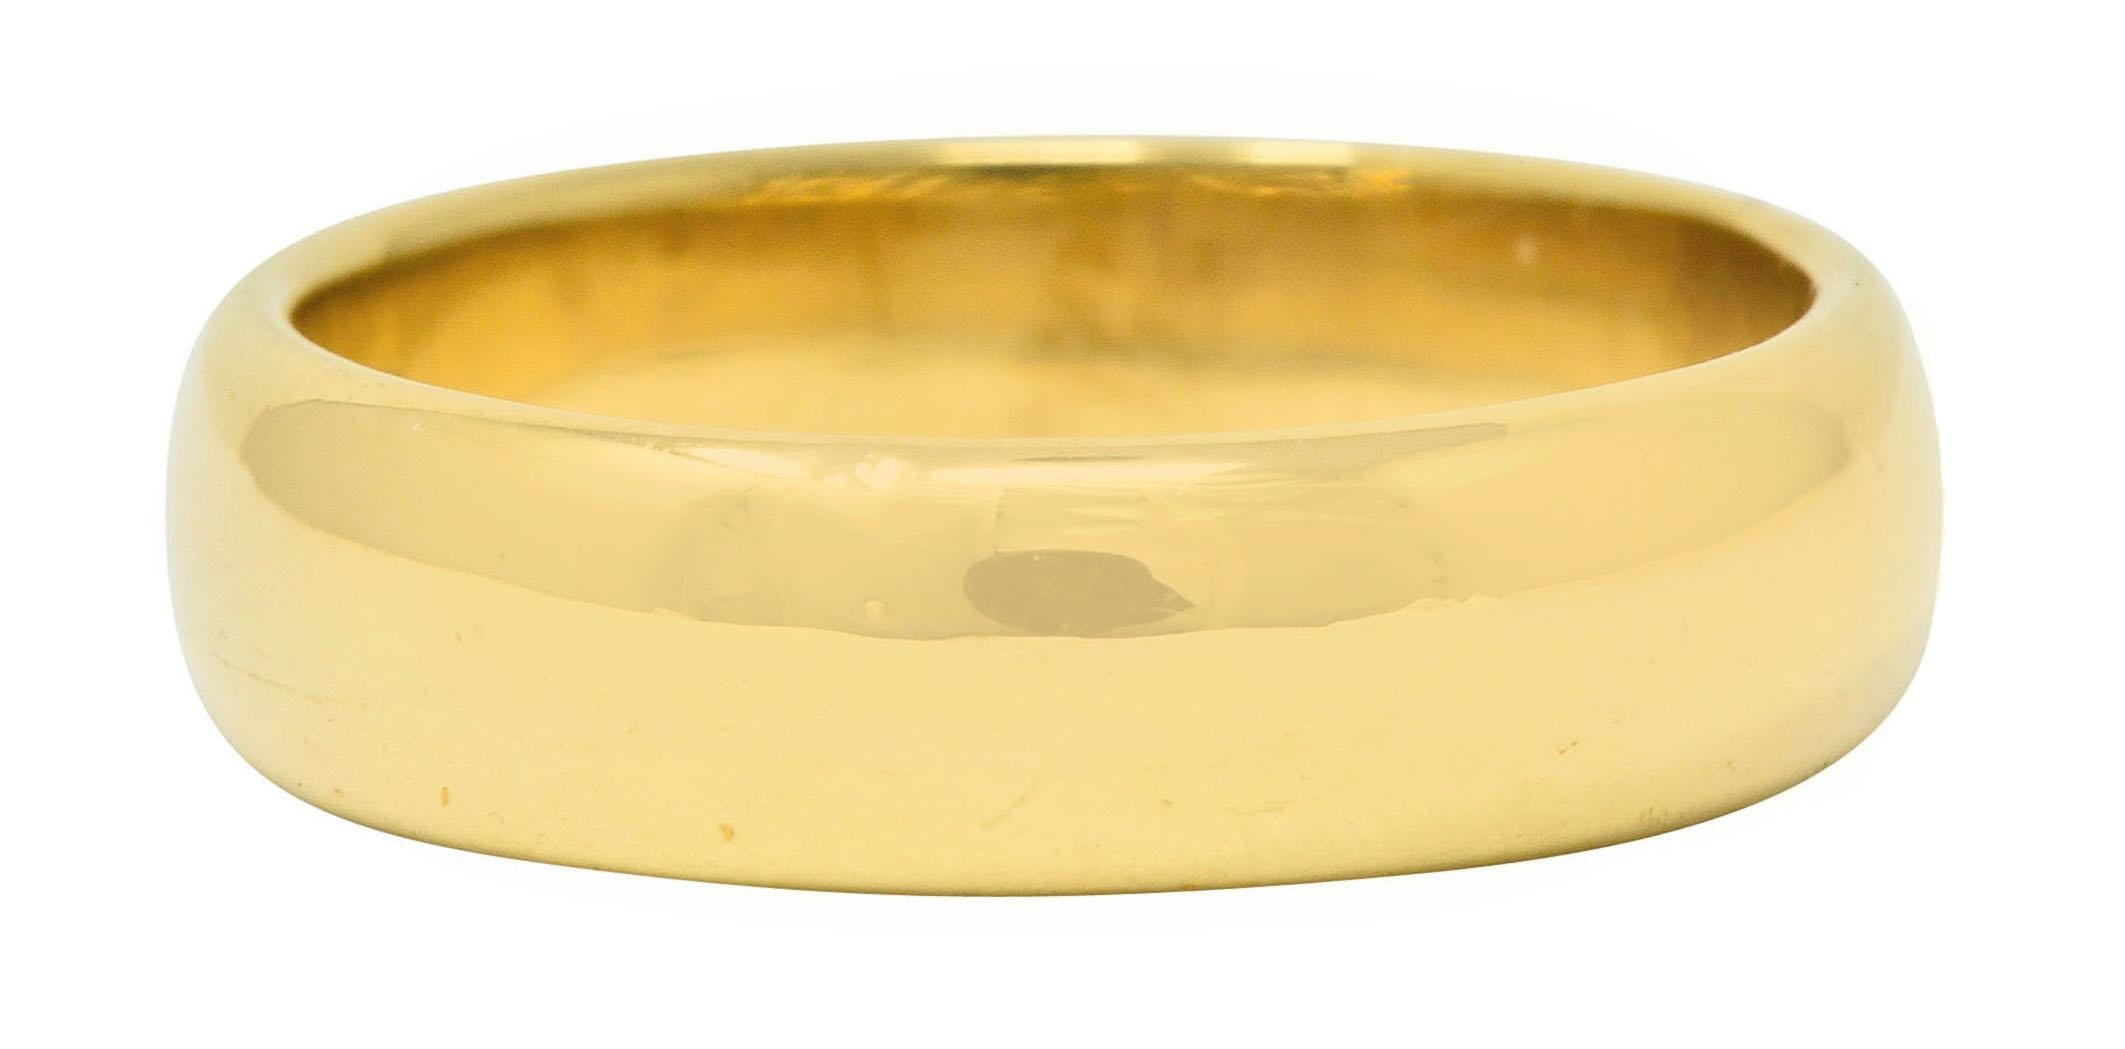 Wide band ring with a rounded curvature

Finished by a high polish

Fully signed Tiffany & Co.

Stamped Au750 for 18 karat gold

Circa: 1990s

Ring Size: 9 1/4 & sizable

Measures: 5.9 mm wide and sits 1.8 mm high

Total weight: 9.3 grams

Classic.